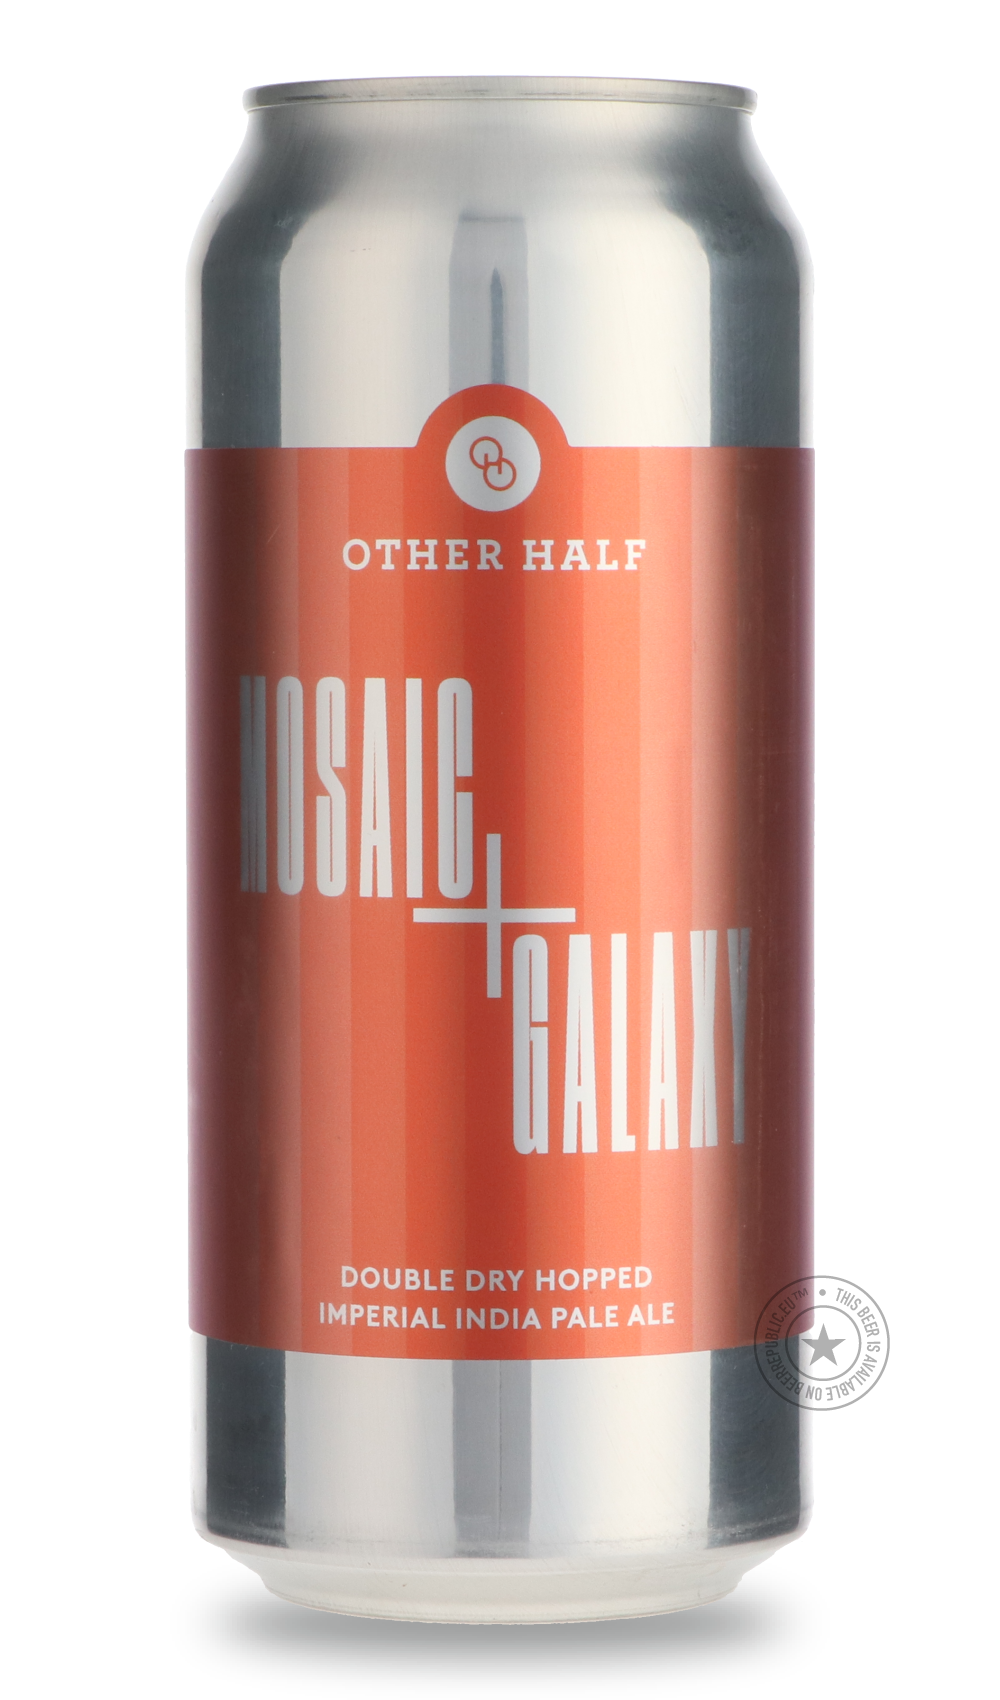 -Other Half- Mosaic + Galaxy-IPA- Only @ Beer Republic - The best online beer store for American & Canadian craft beer - Buy beer online from the USA and Canada - Bier online kopen - Amerikaans bier kopen - Craft beer store - Craft beer kopen - Amerikanisch bier kaufen - Bier online kaufen - Acheter biere online - IPA - Stout - Porter - New England IPA - Hazy IPA - Imperial Stout - Barrel Aged - Barrel Aged Imperial Stout - Brown - Dark beer - Blond - Blonde - Pilsner - Lager - Wheat - Weizen - Amber - Barl